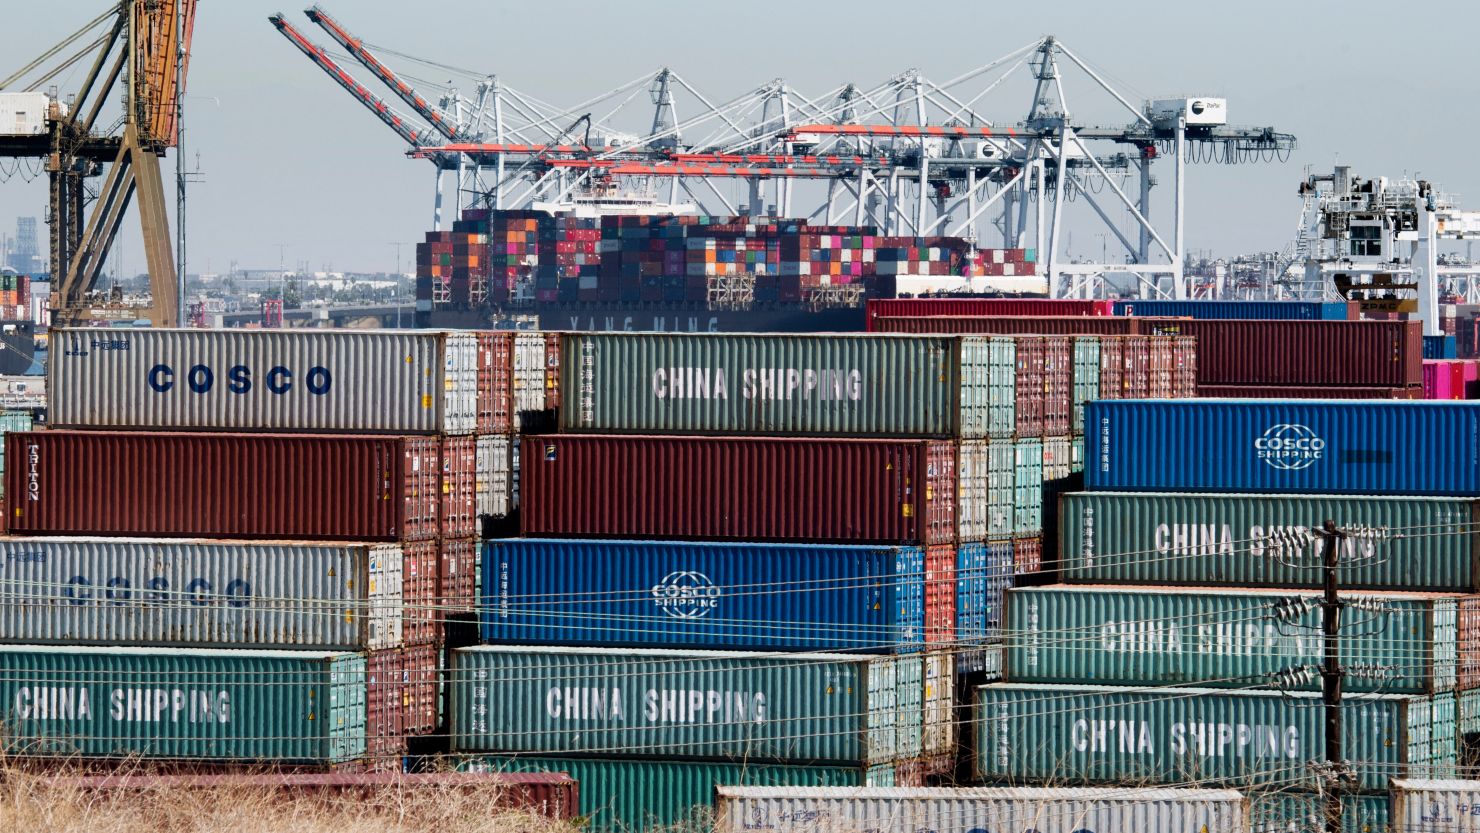 Shipping containers from China and other Asian countries are unloaded at the Port of Los Angeles in Long Beach, California, on September 14, 2019.